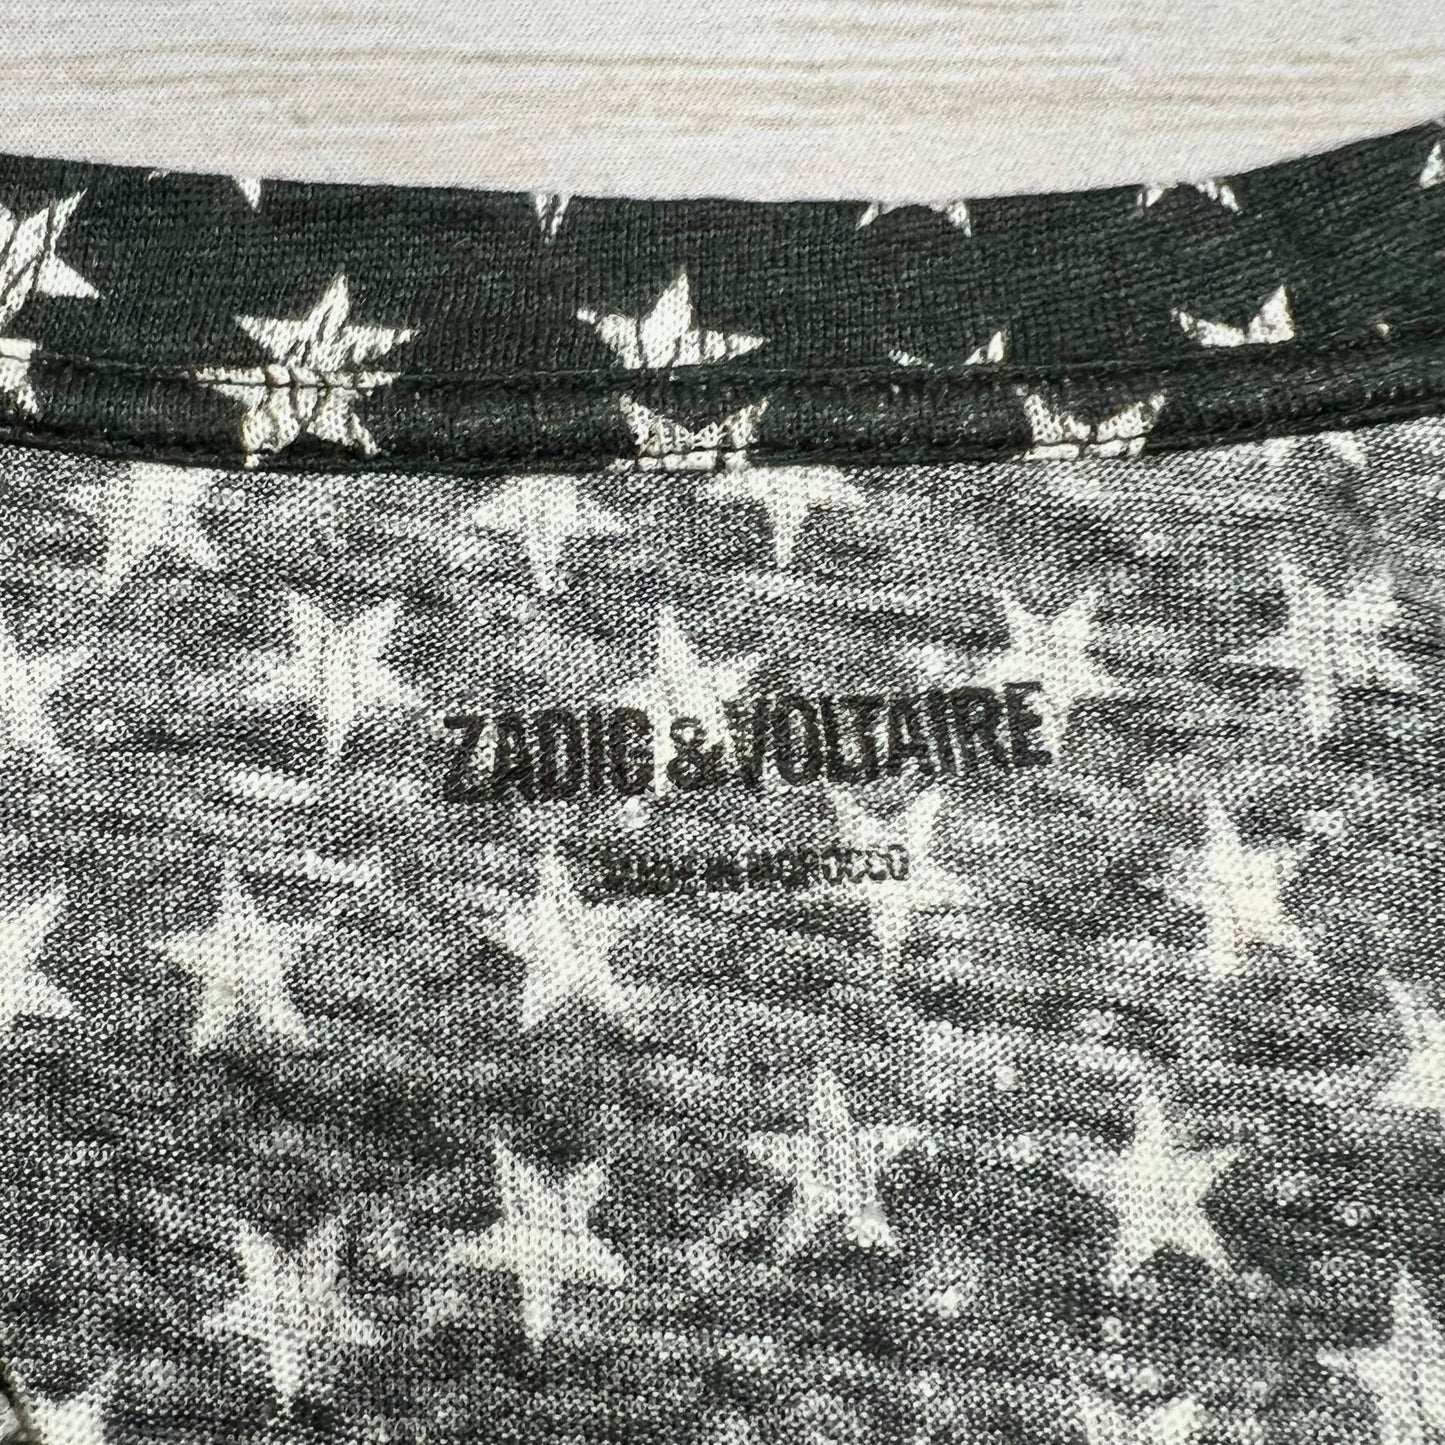 Top Short Sleeve Designer By Zadig And Voltaire  Size: Xs